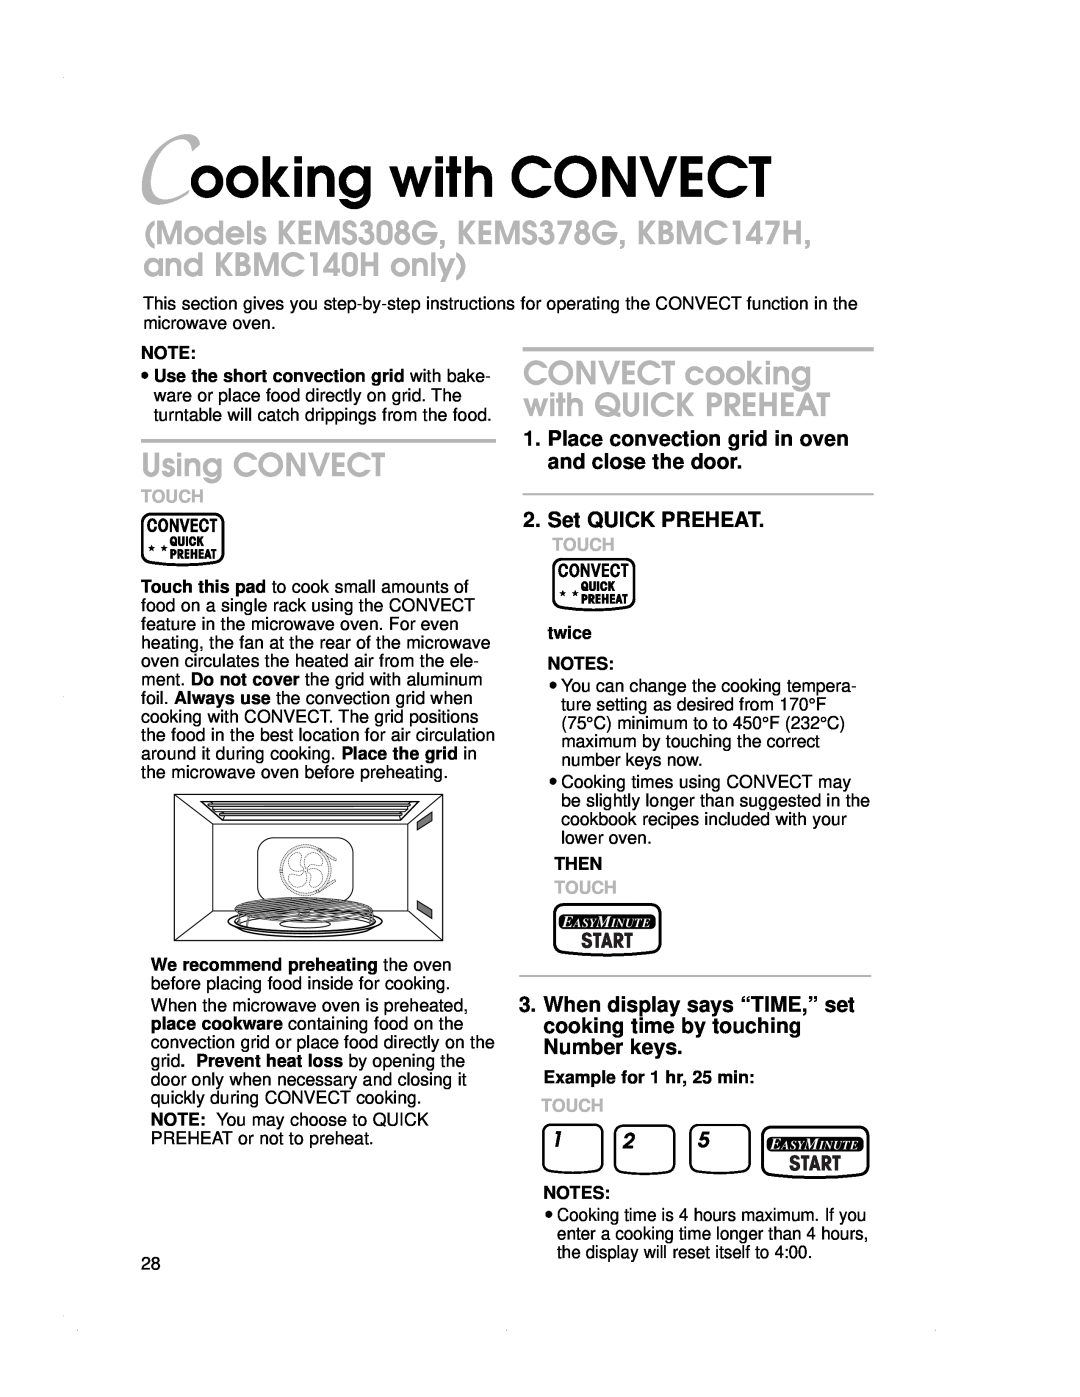 KitchenAid Cooking with CONVECT, Models KEMS308G, KEMS378G, KBMC147H, and KBMC140H only, Using CONVECT, Convect, Start 